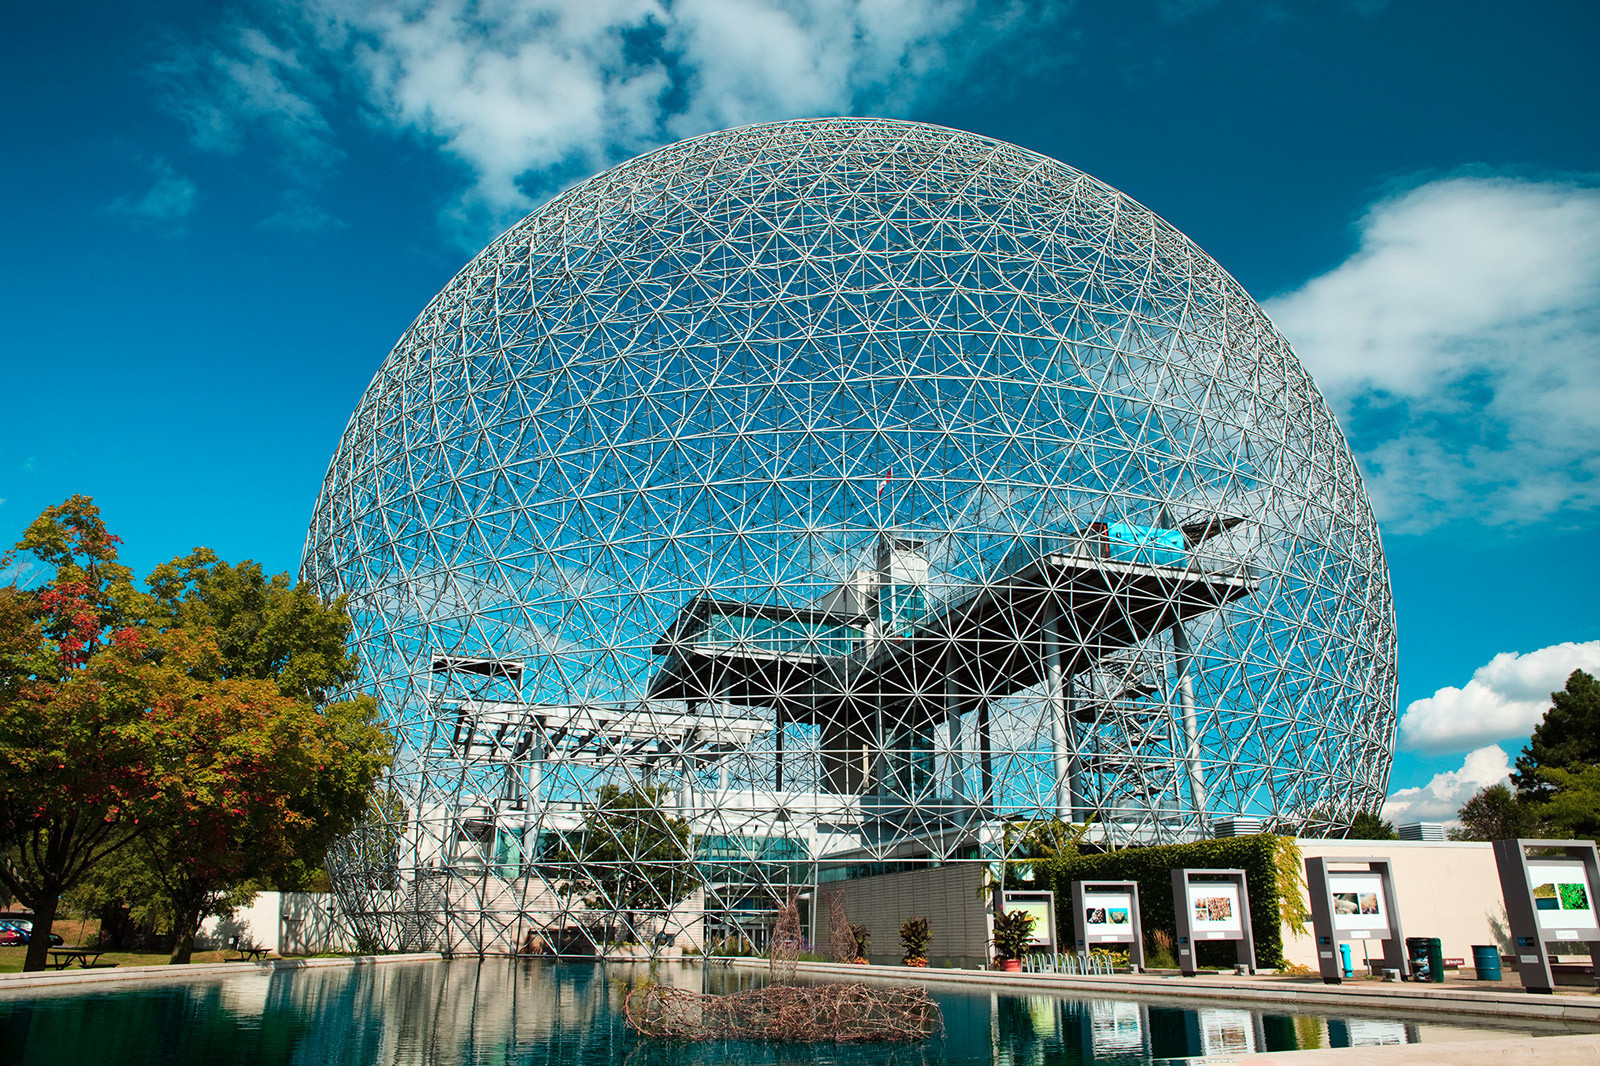 The gridshell 'geodesic dome', designed by Richard Buckminster Fuller, at Montreal Biosphere museum